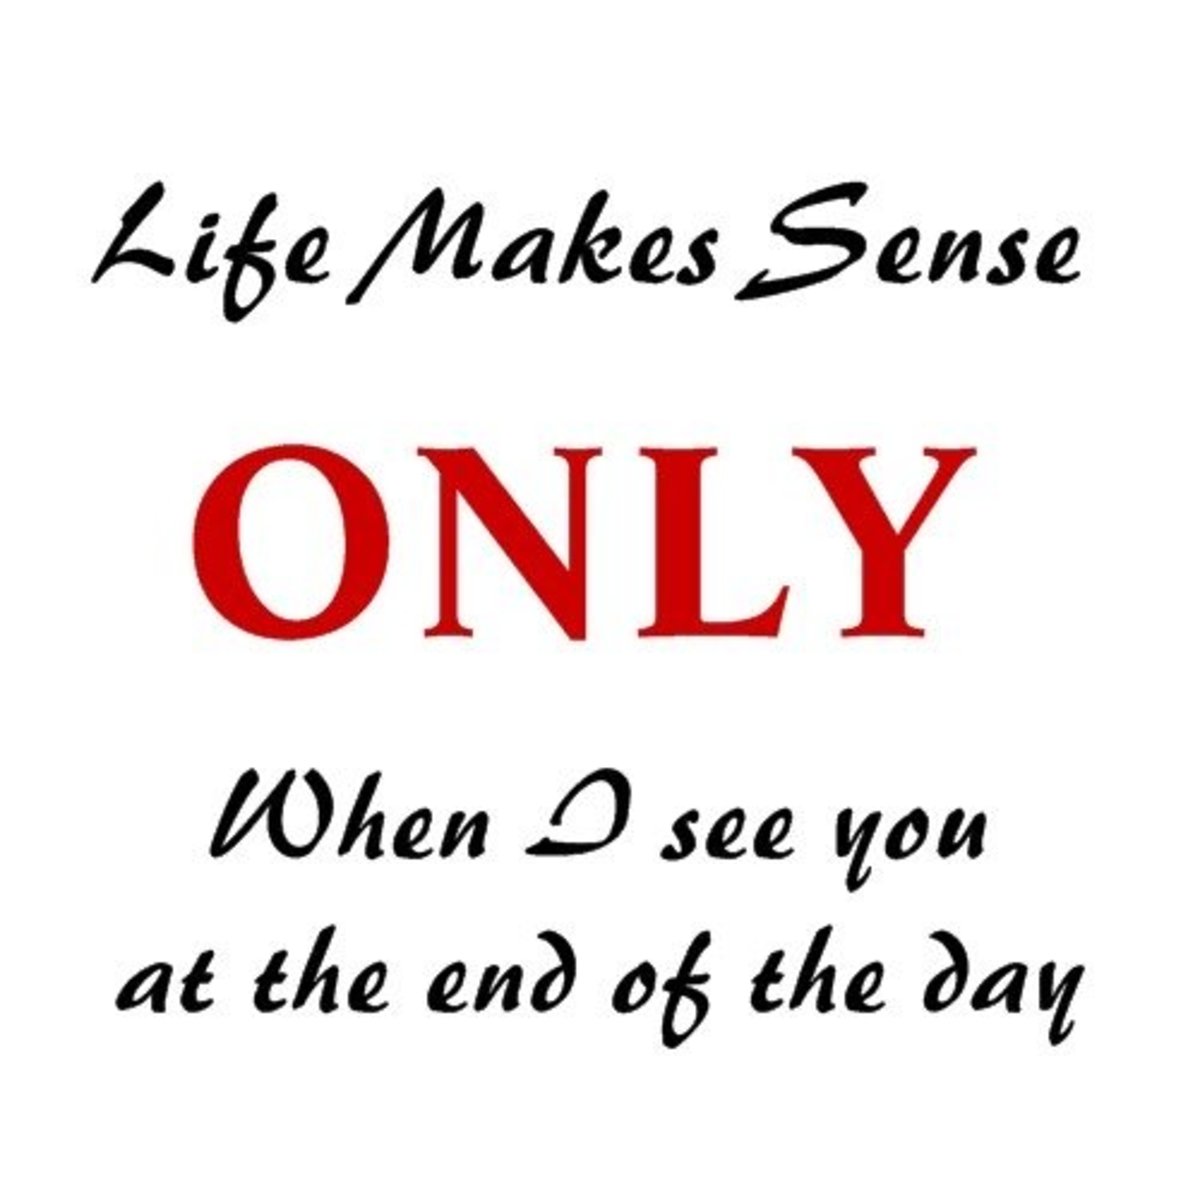 "Life makes sense only when I see you at the end of the day."